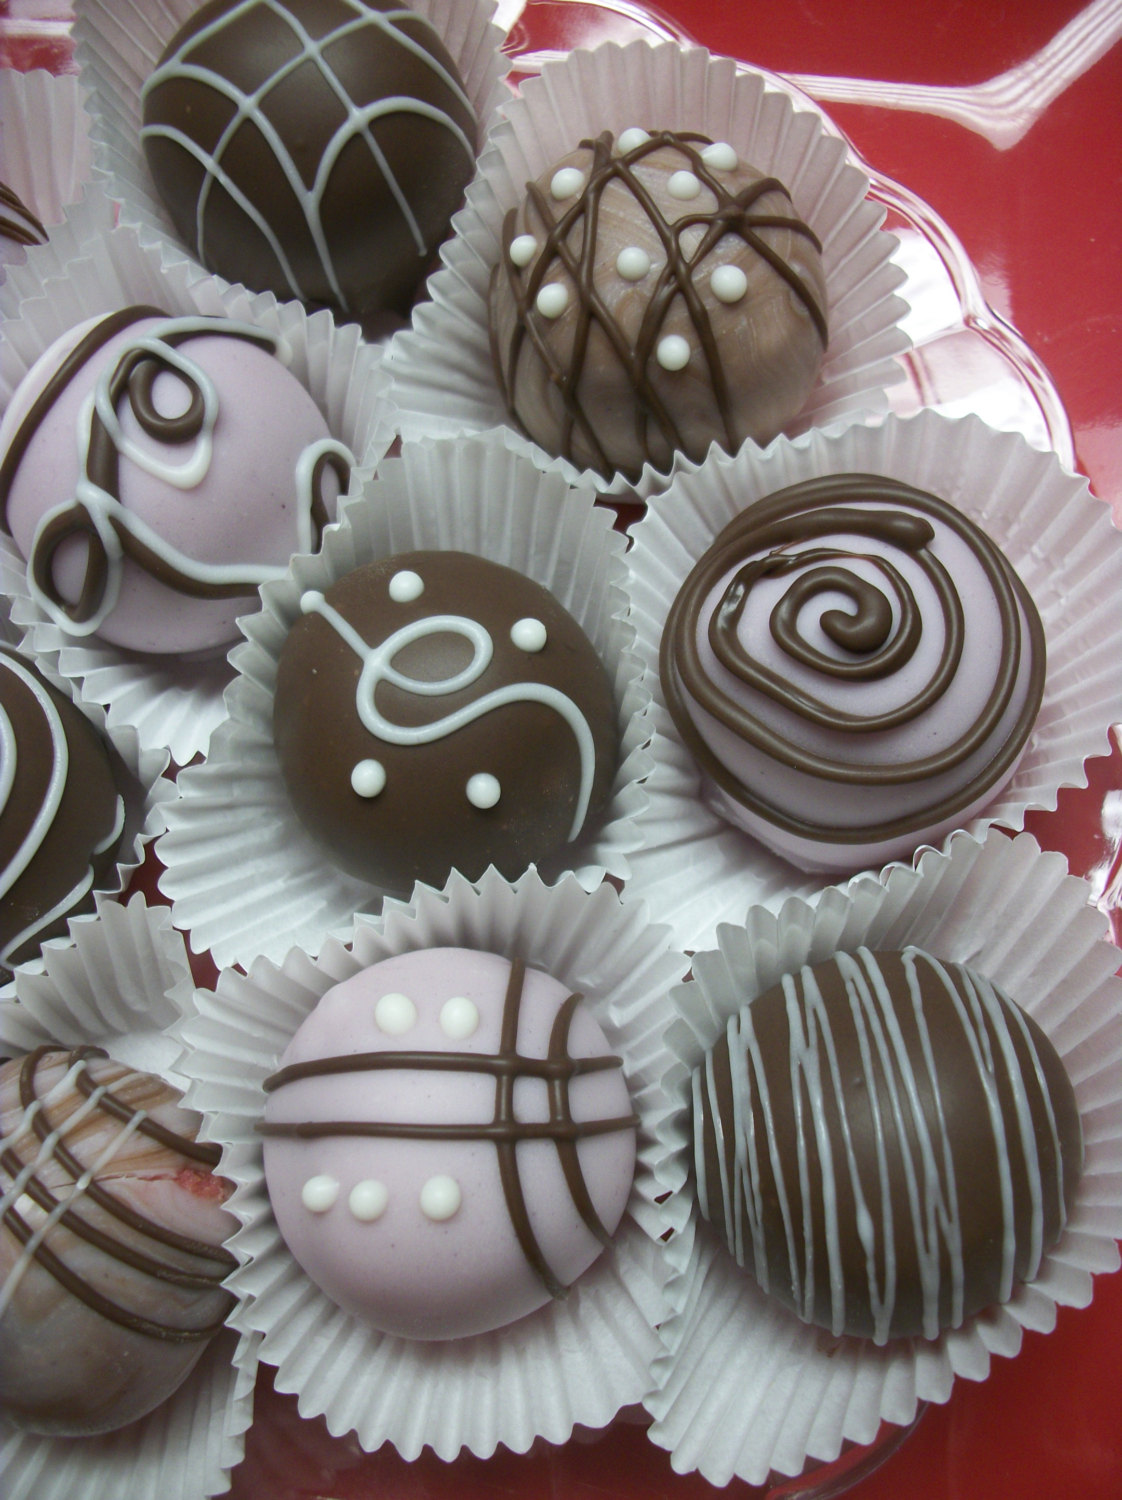 Cake Balls Lavender Chocolate colored Coated 12 pieces